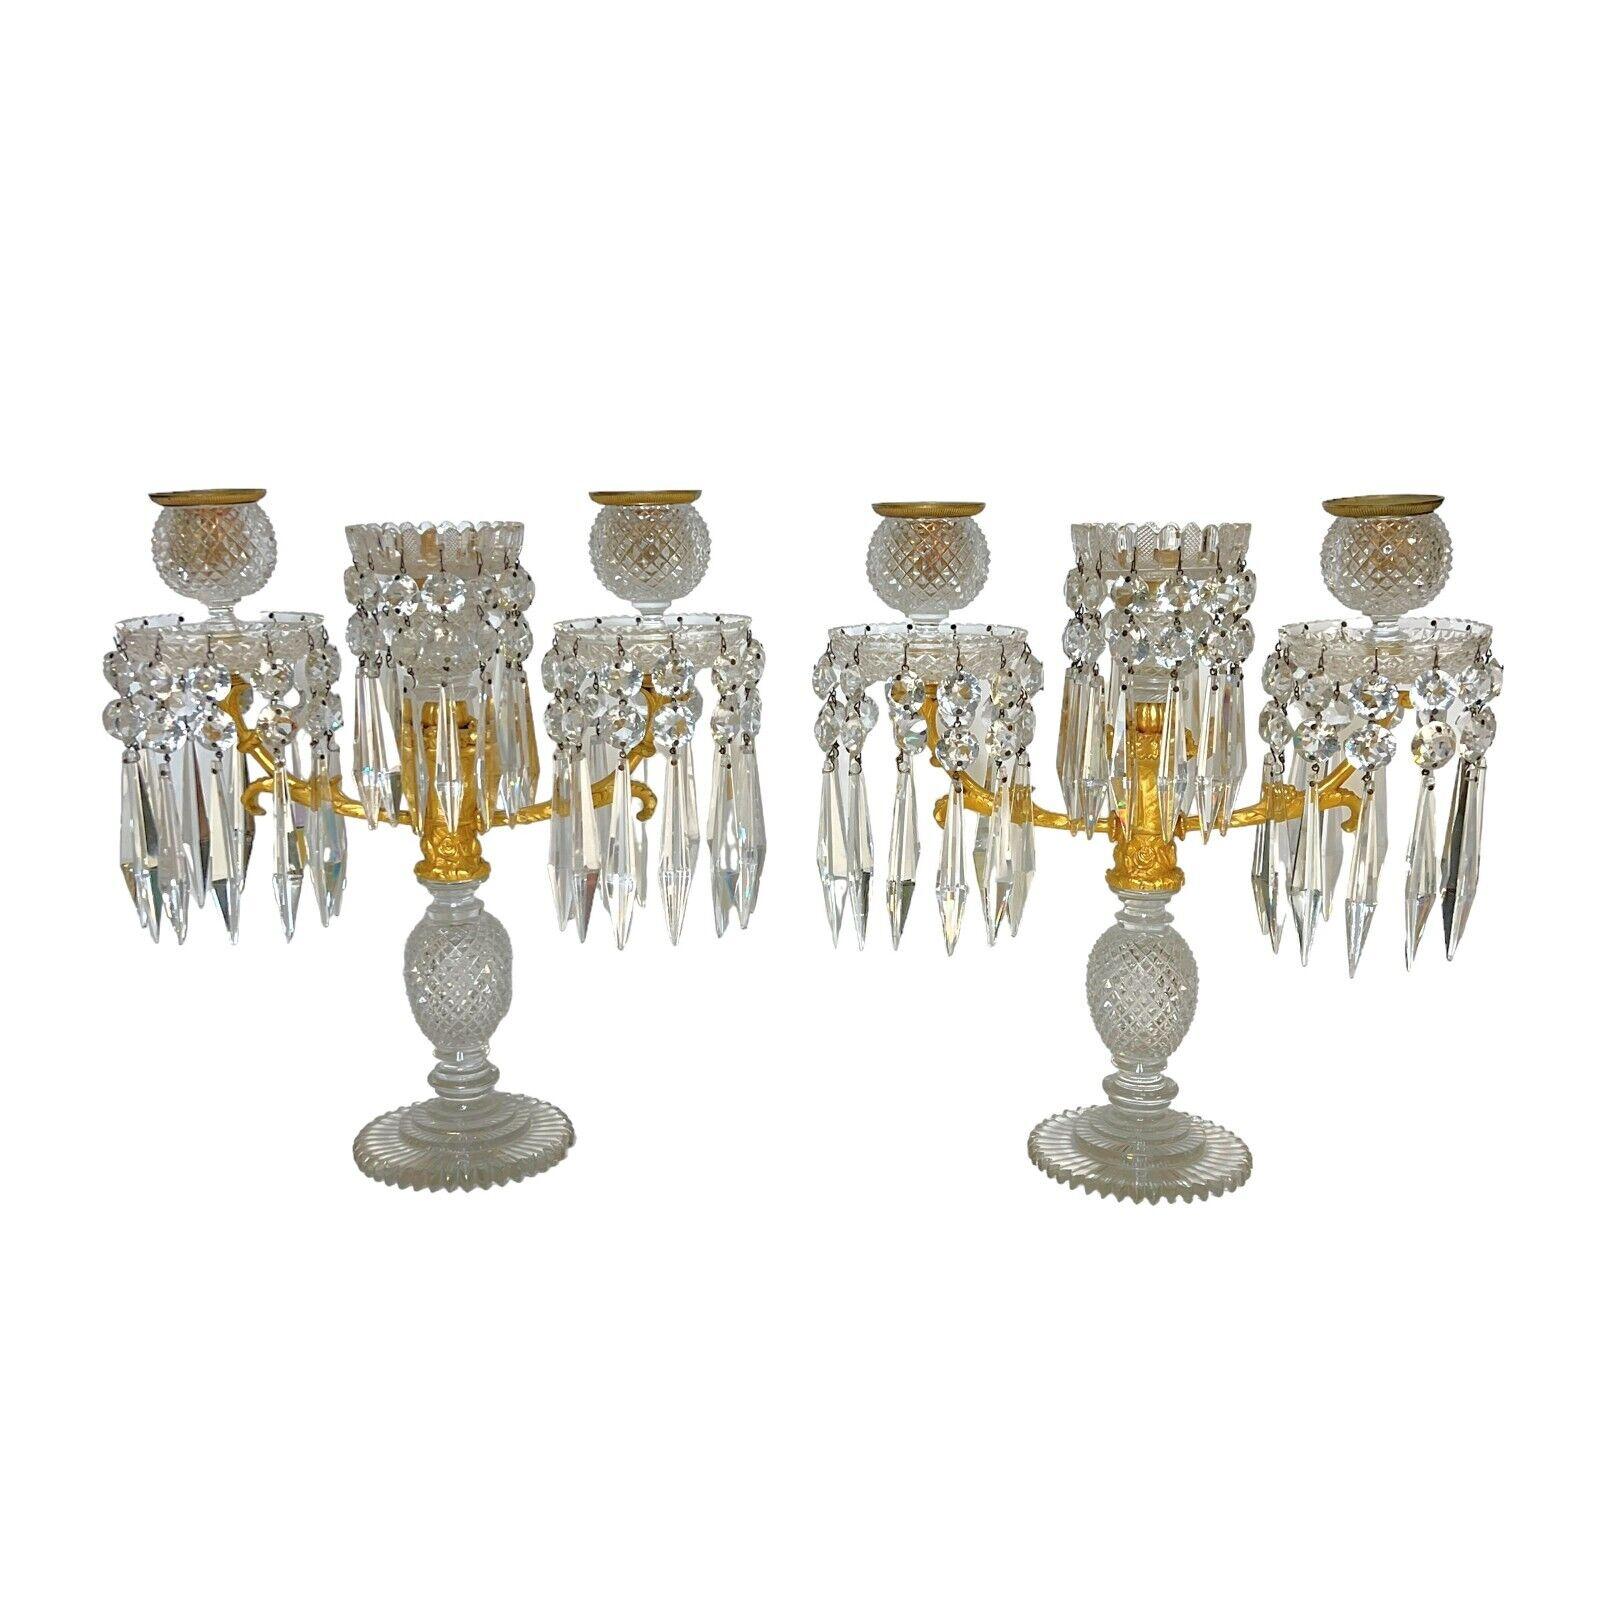 Indulge in the timeless elegance of these exquisite English Regency Candelabra, a stunning testament to the craftsmanship of the era. Crafted circa 1820 and attributed to the esteemed artisan John Blades, these ornate pieces blend the opulence of